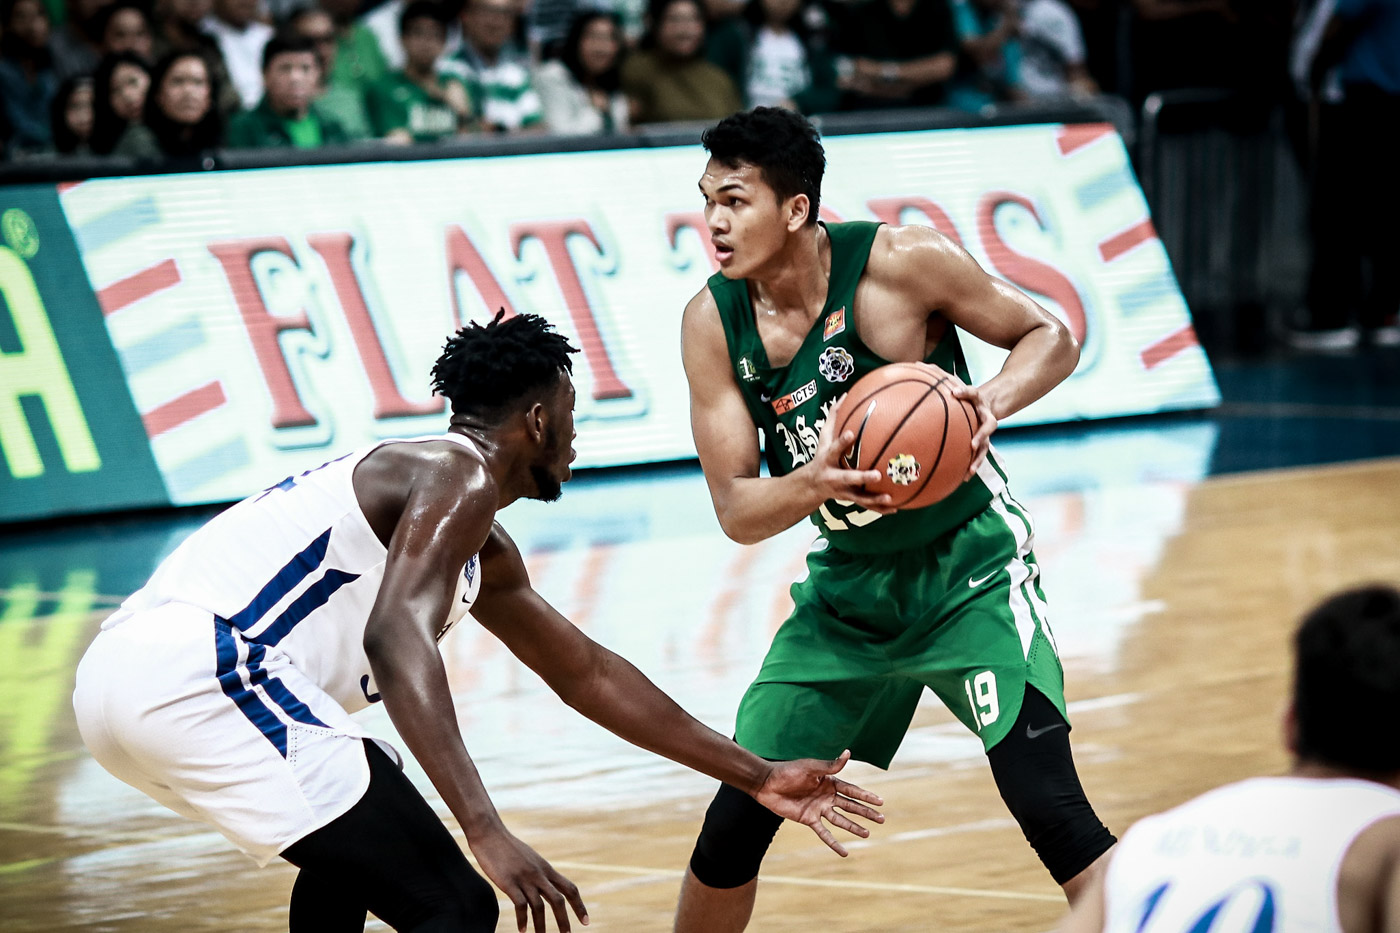 TWIN TOWERS. La Salle's Justine Baltazar (right) and Ateneo's Angelo Kouame go head-to-head one more time. Photo by Michael Gatpandan/Rappler  